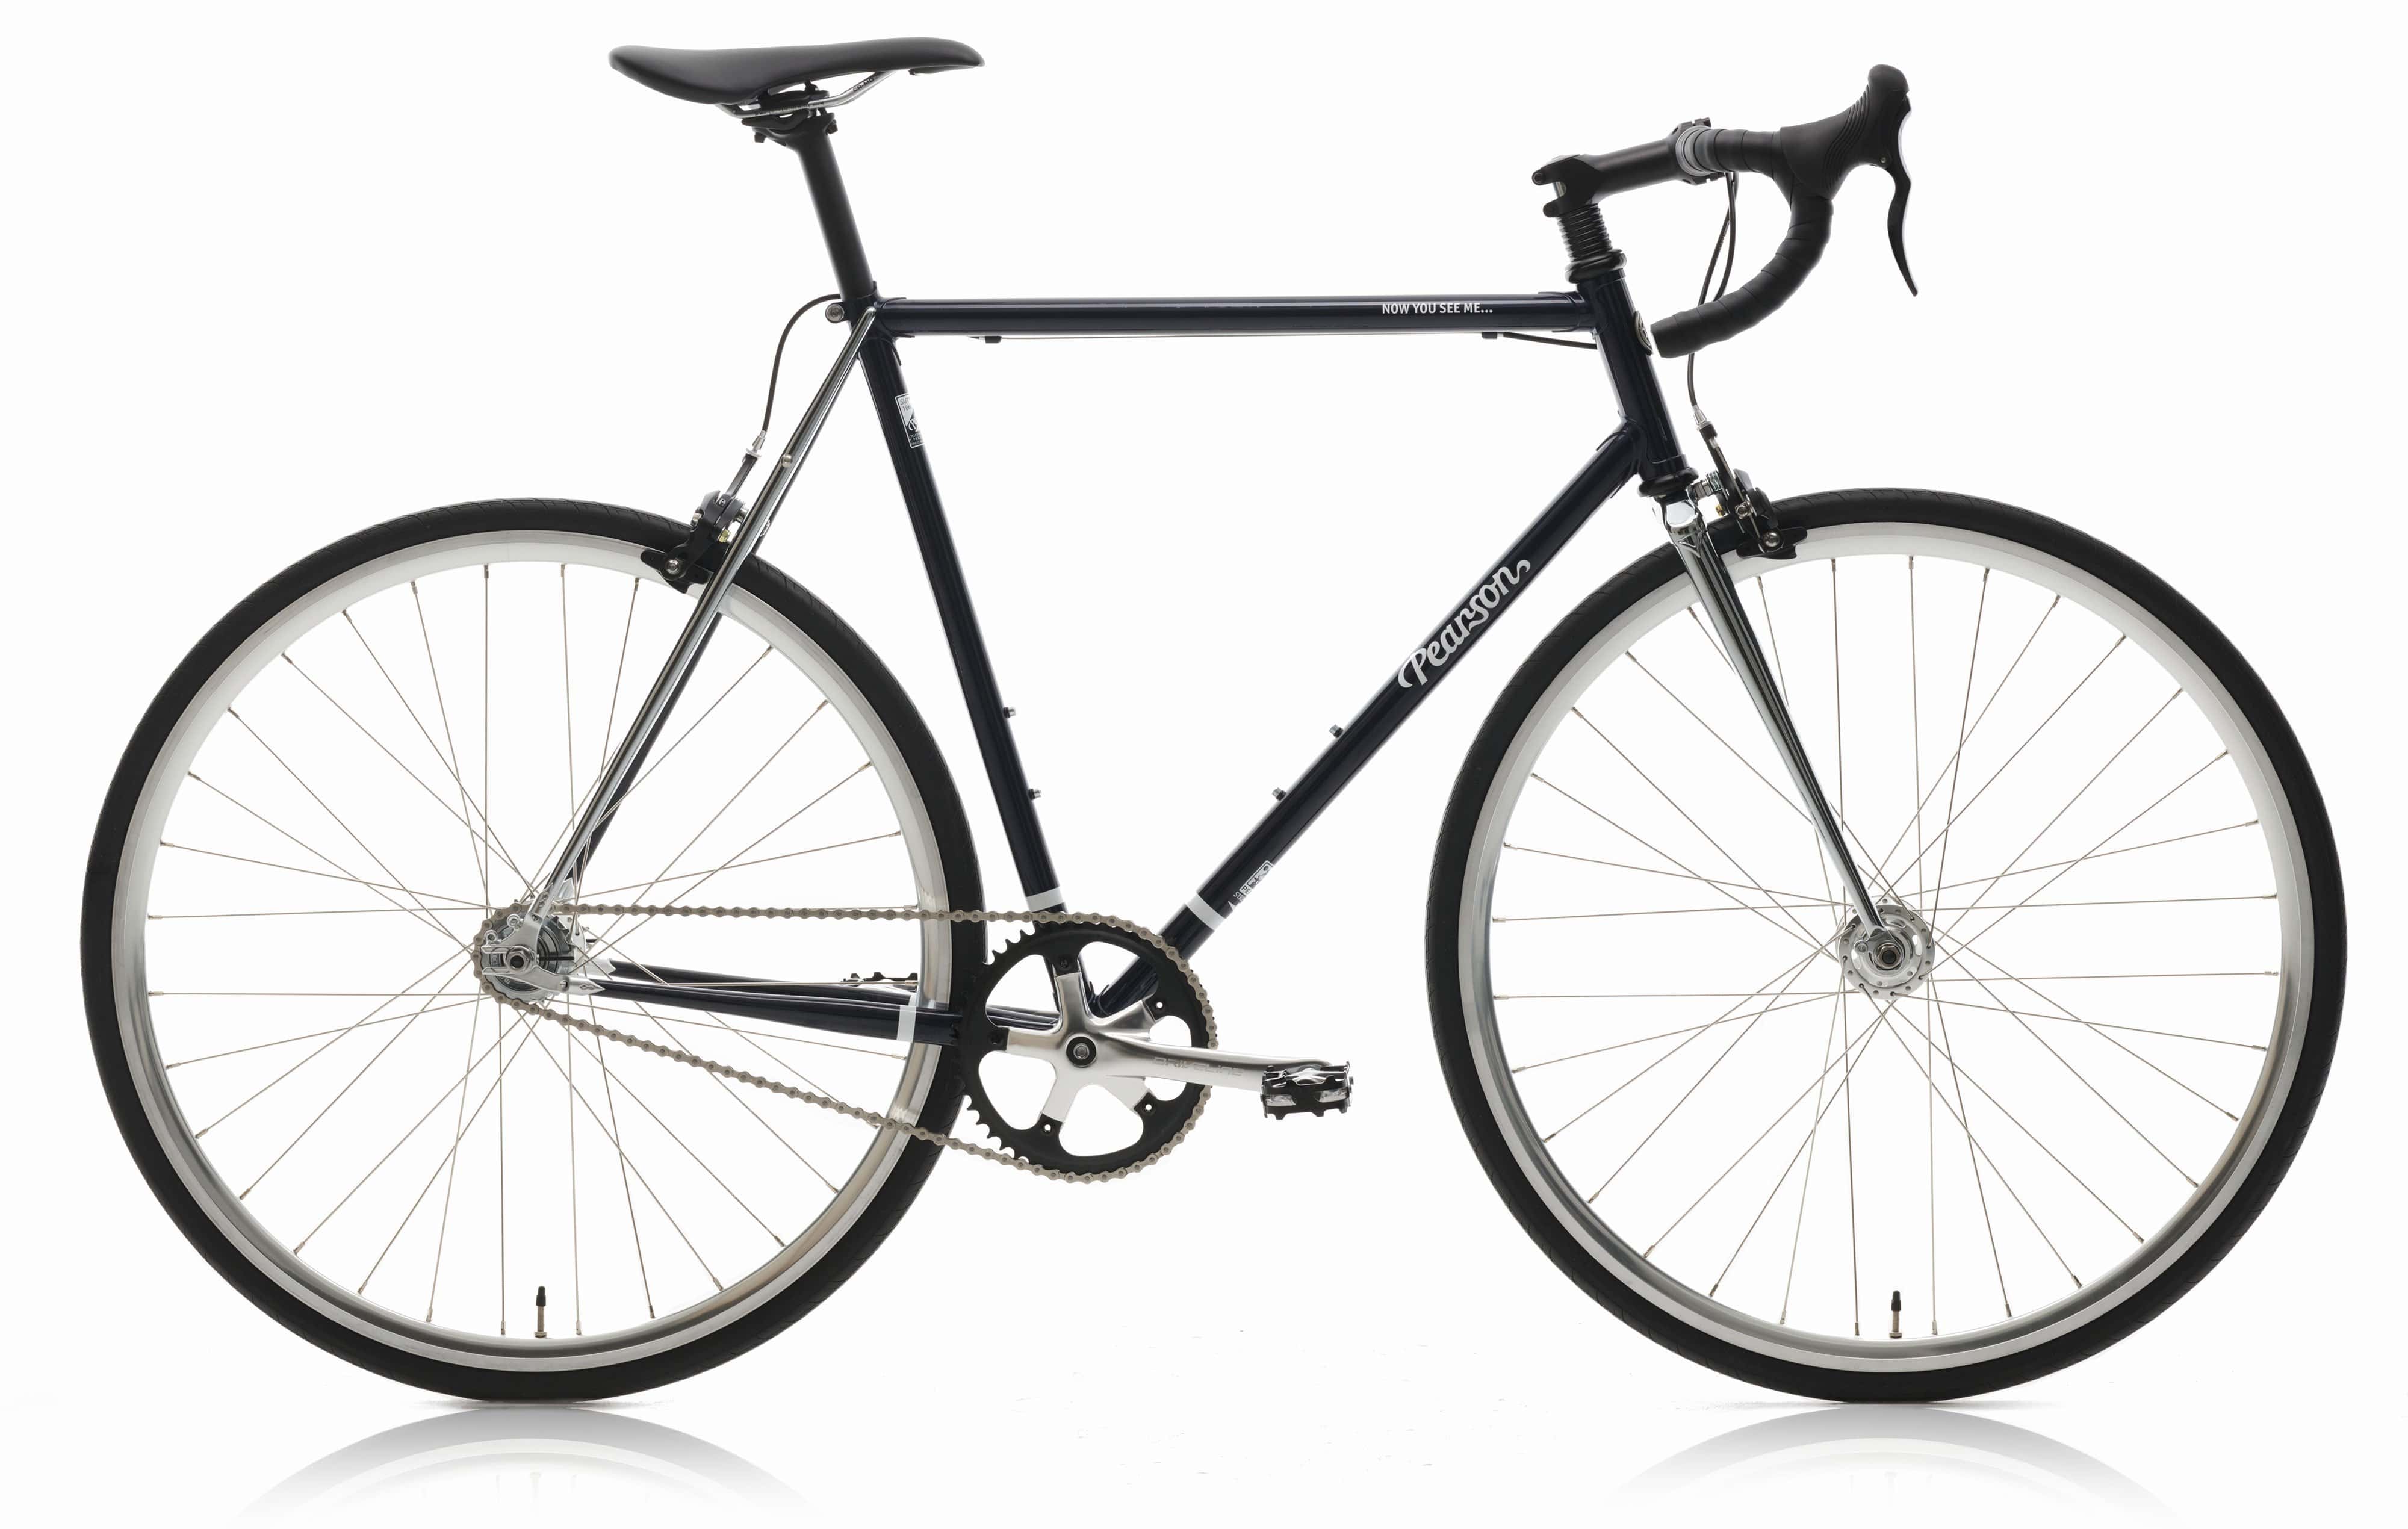 Pcs  Now You See Me - Steel Single Speed Bike  Continental Gator Hardshell 28mm / Without Mudguards / Small